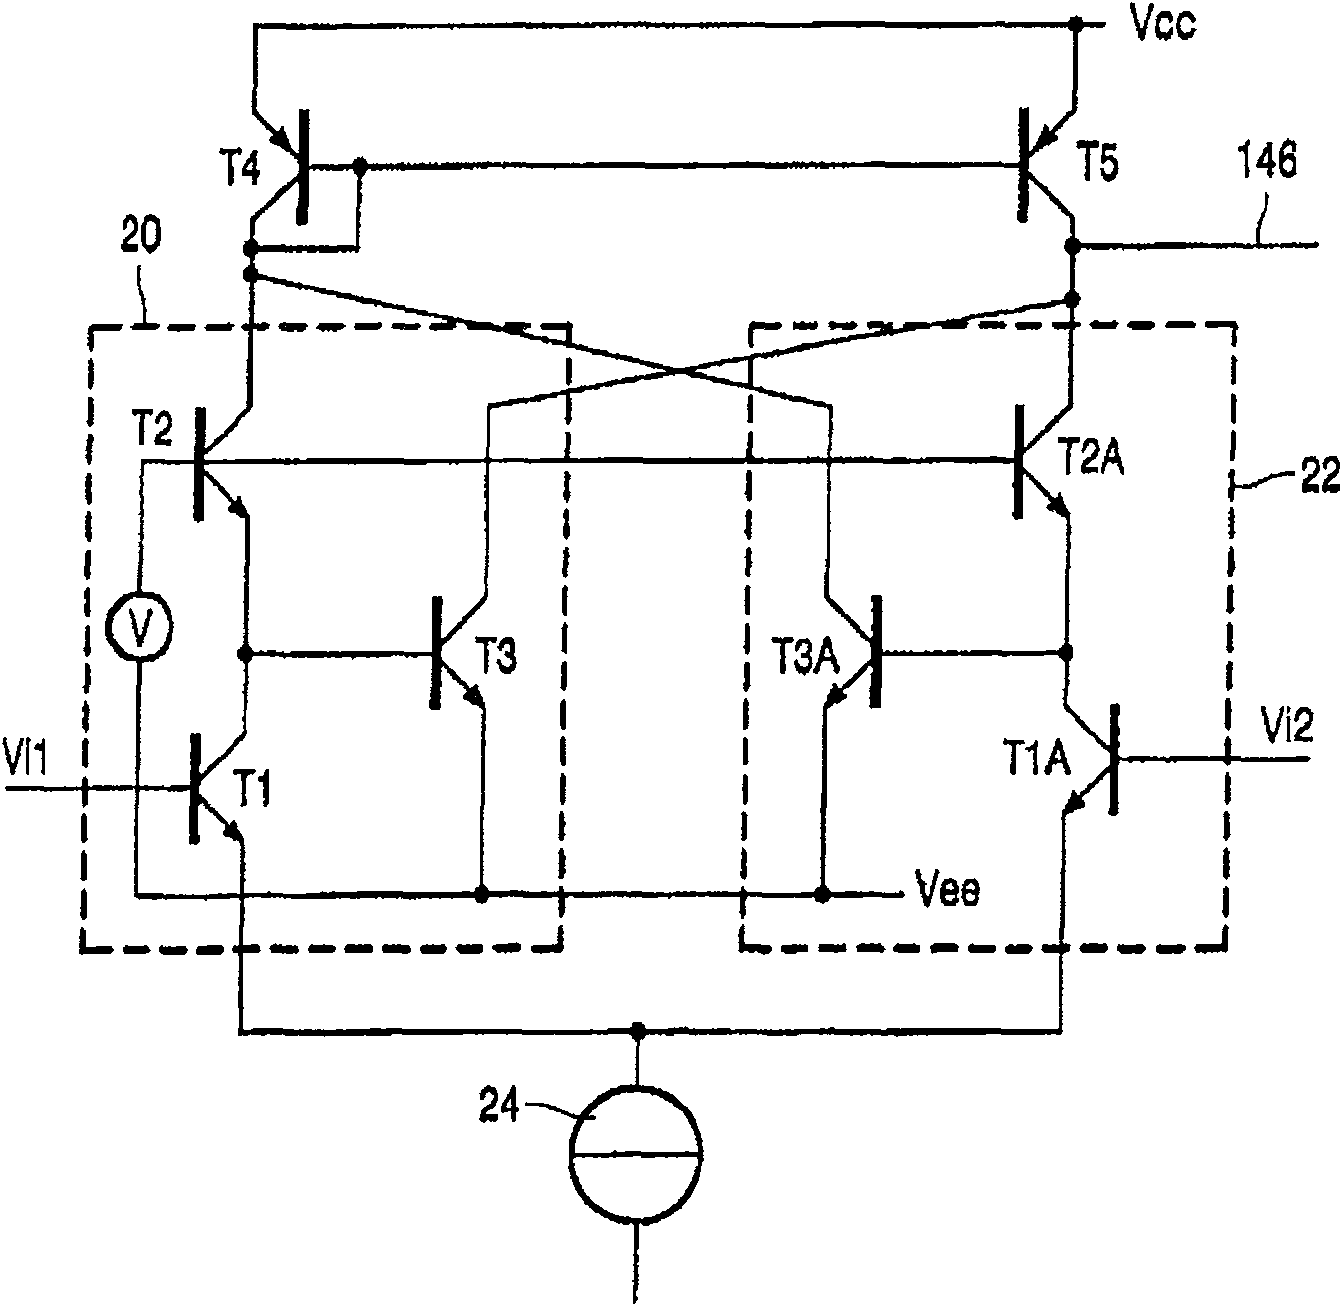 Image display apparatus and high voltage driver circuit